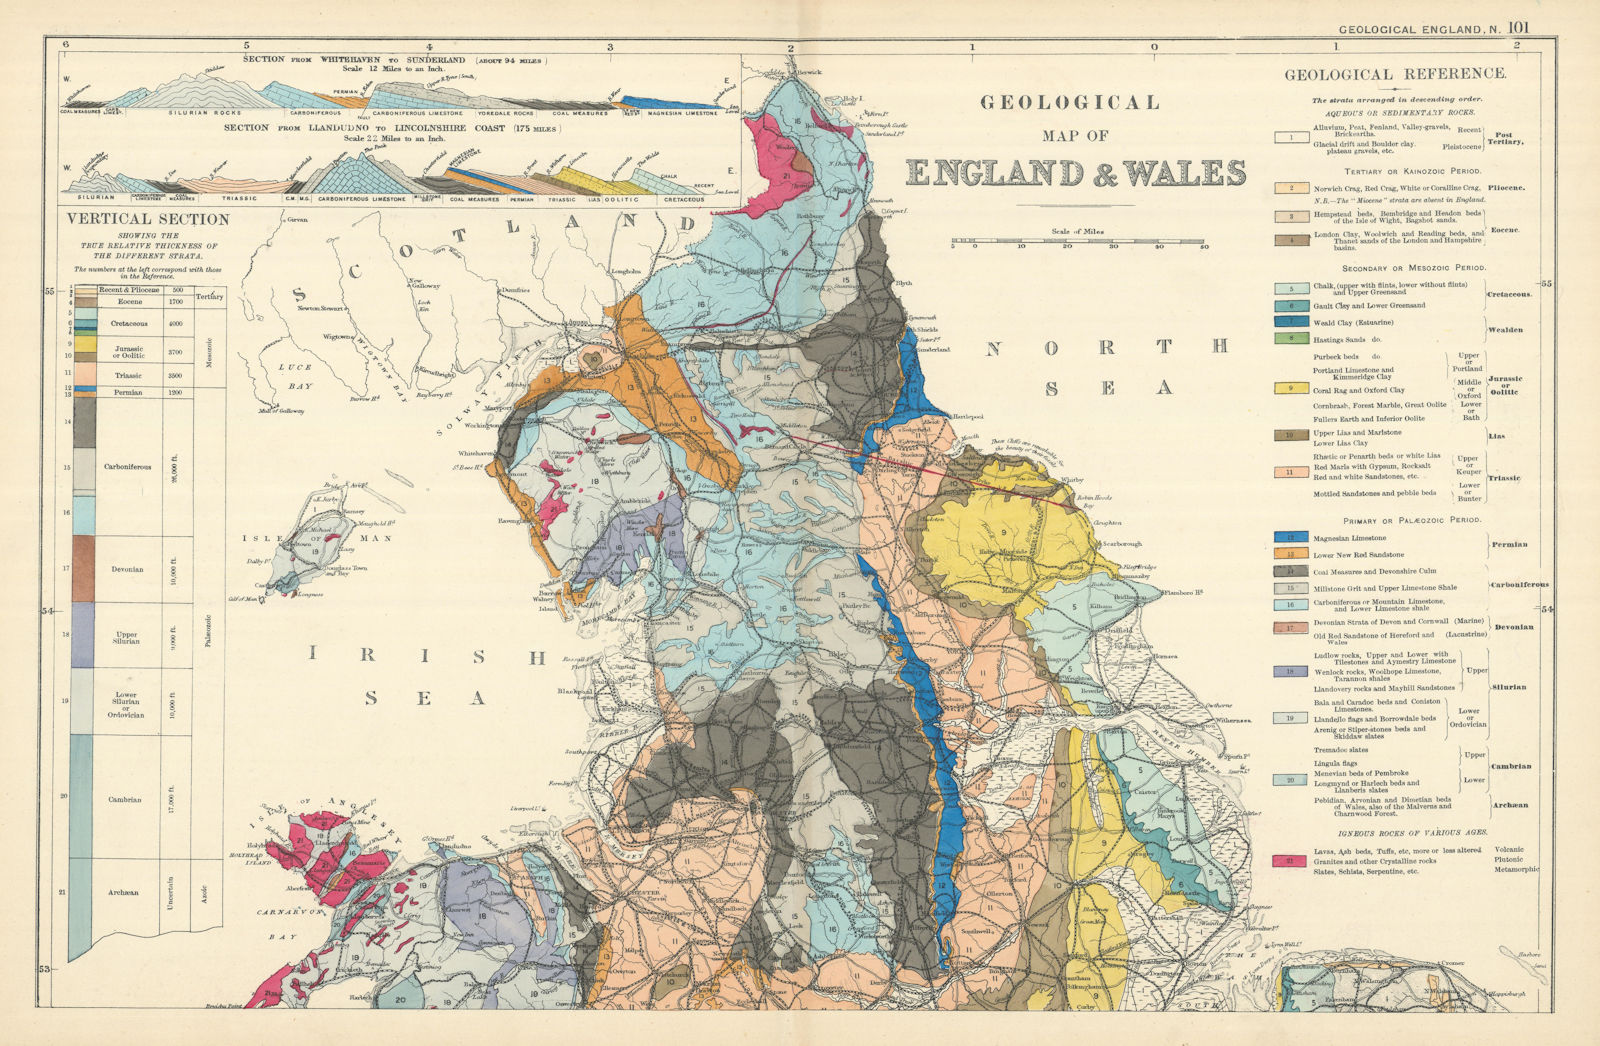 GEOLOGICAL ENGLAND & WALES (North sheet) antique map by GW BACON 1898 old